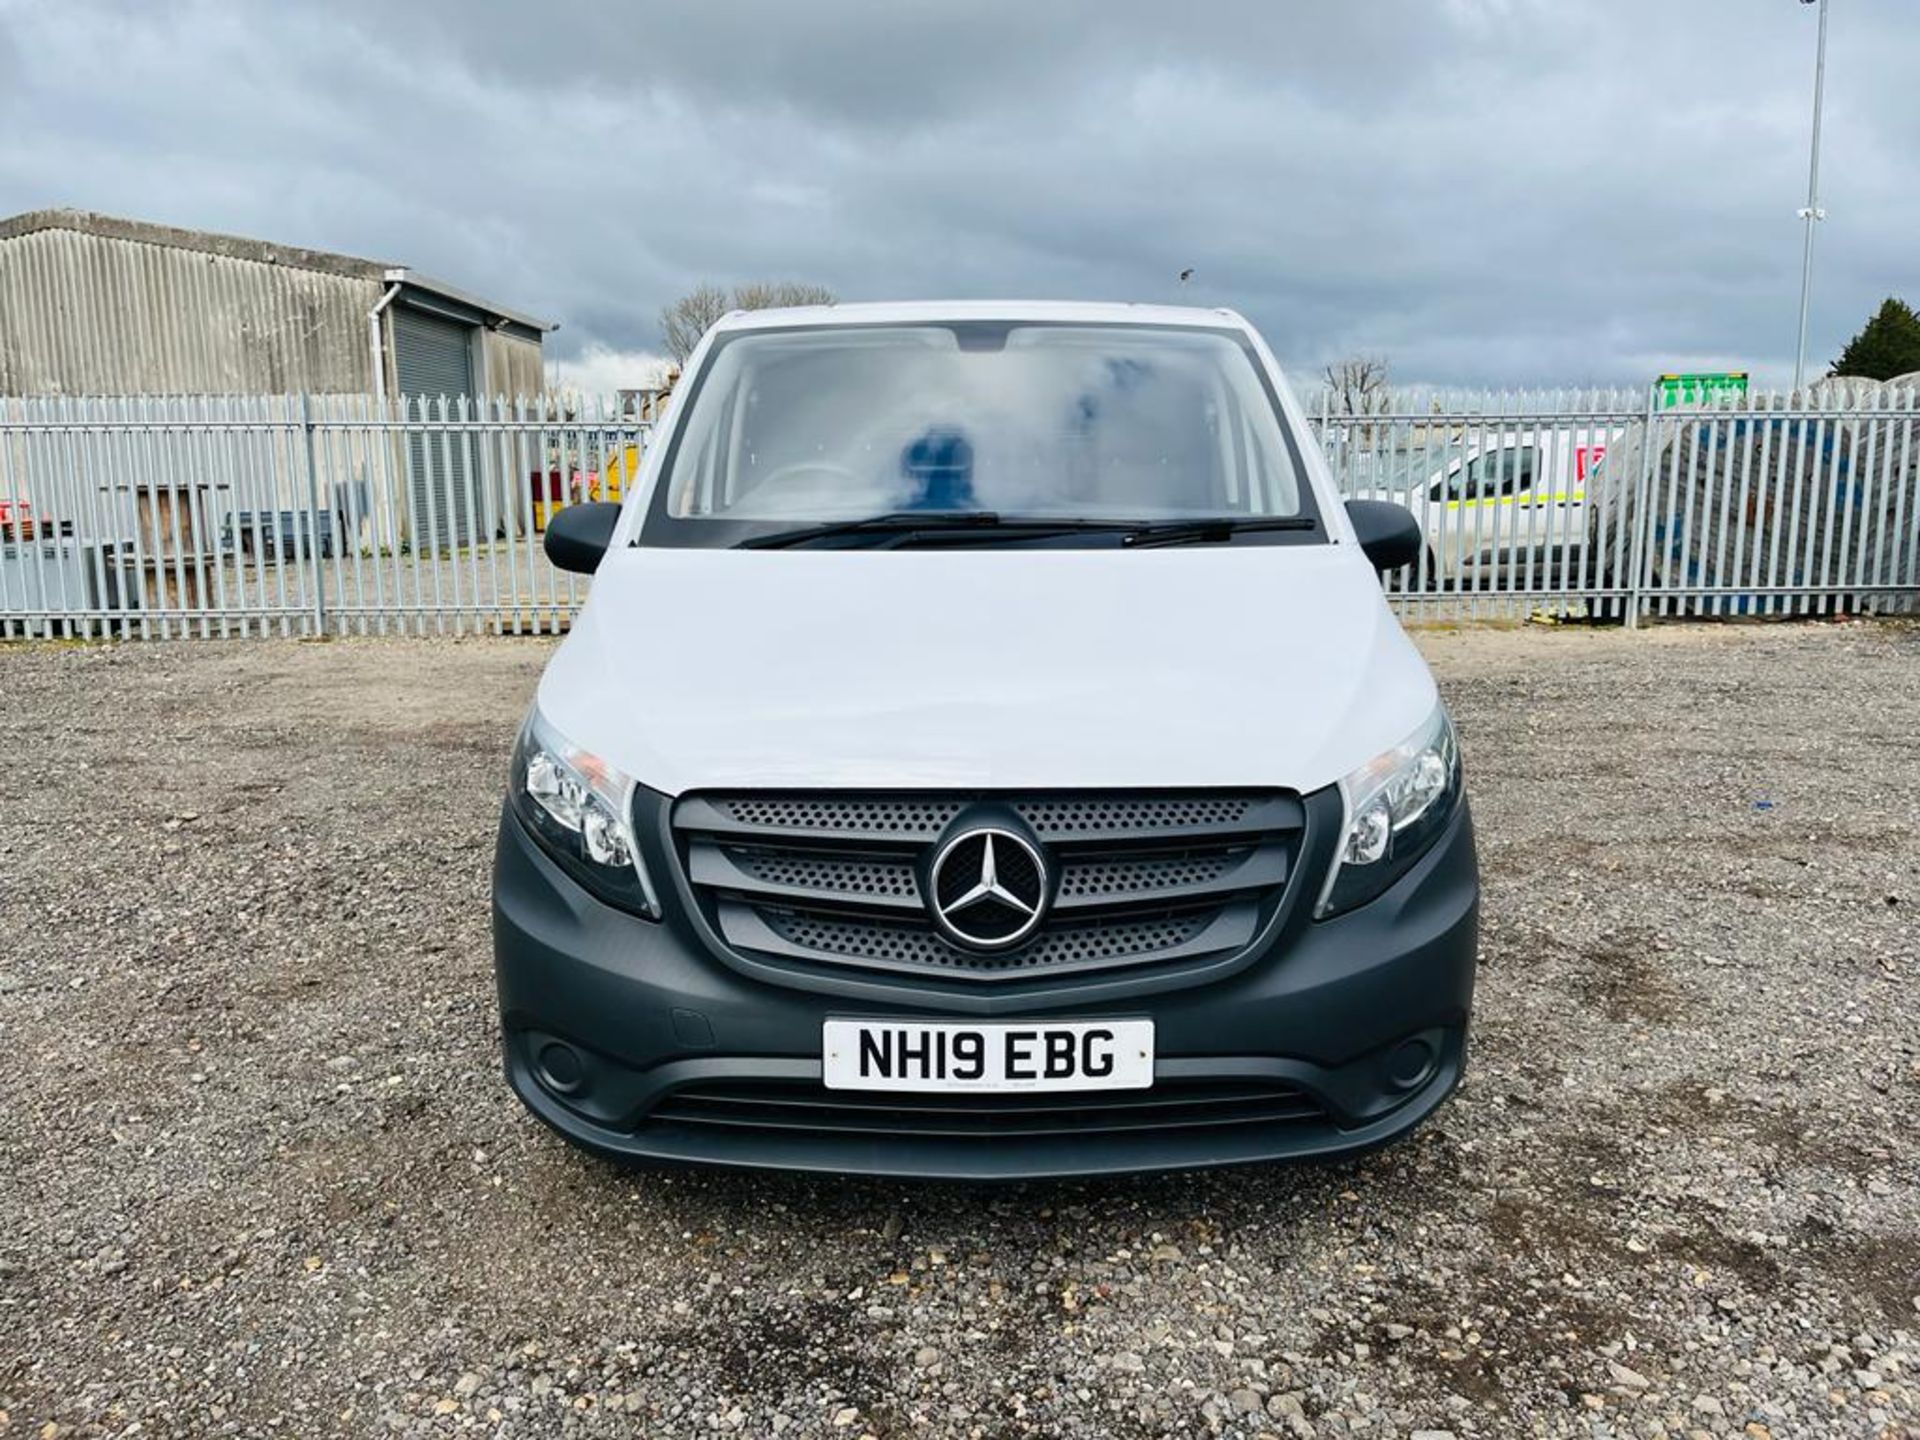 Mercedes Benz Vito 1.6 111 CDI FWD 2019 '19 Reg' - ULEZ Compliant - Only 85,733 Miles - Image 2 of 24